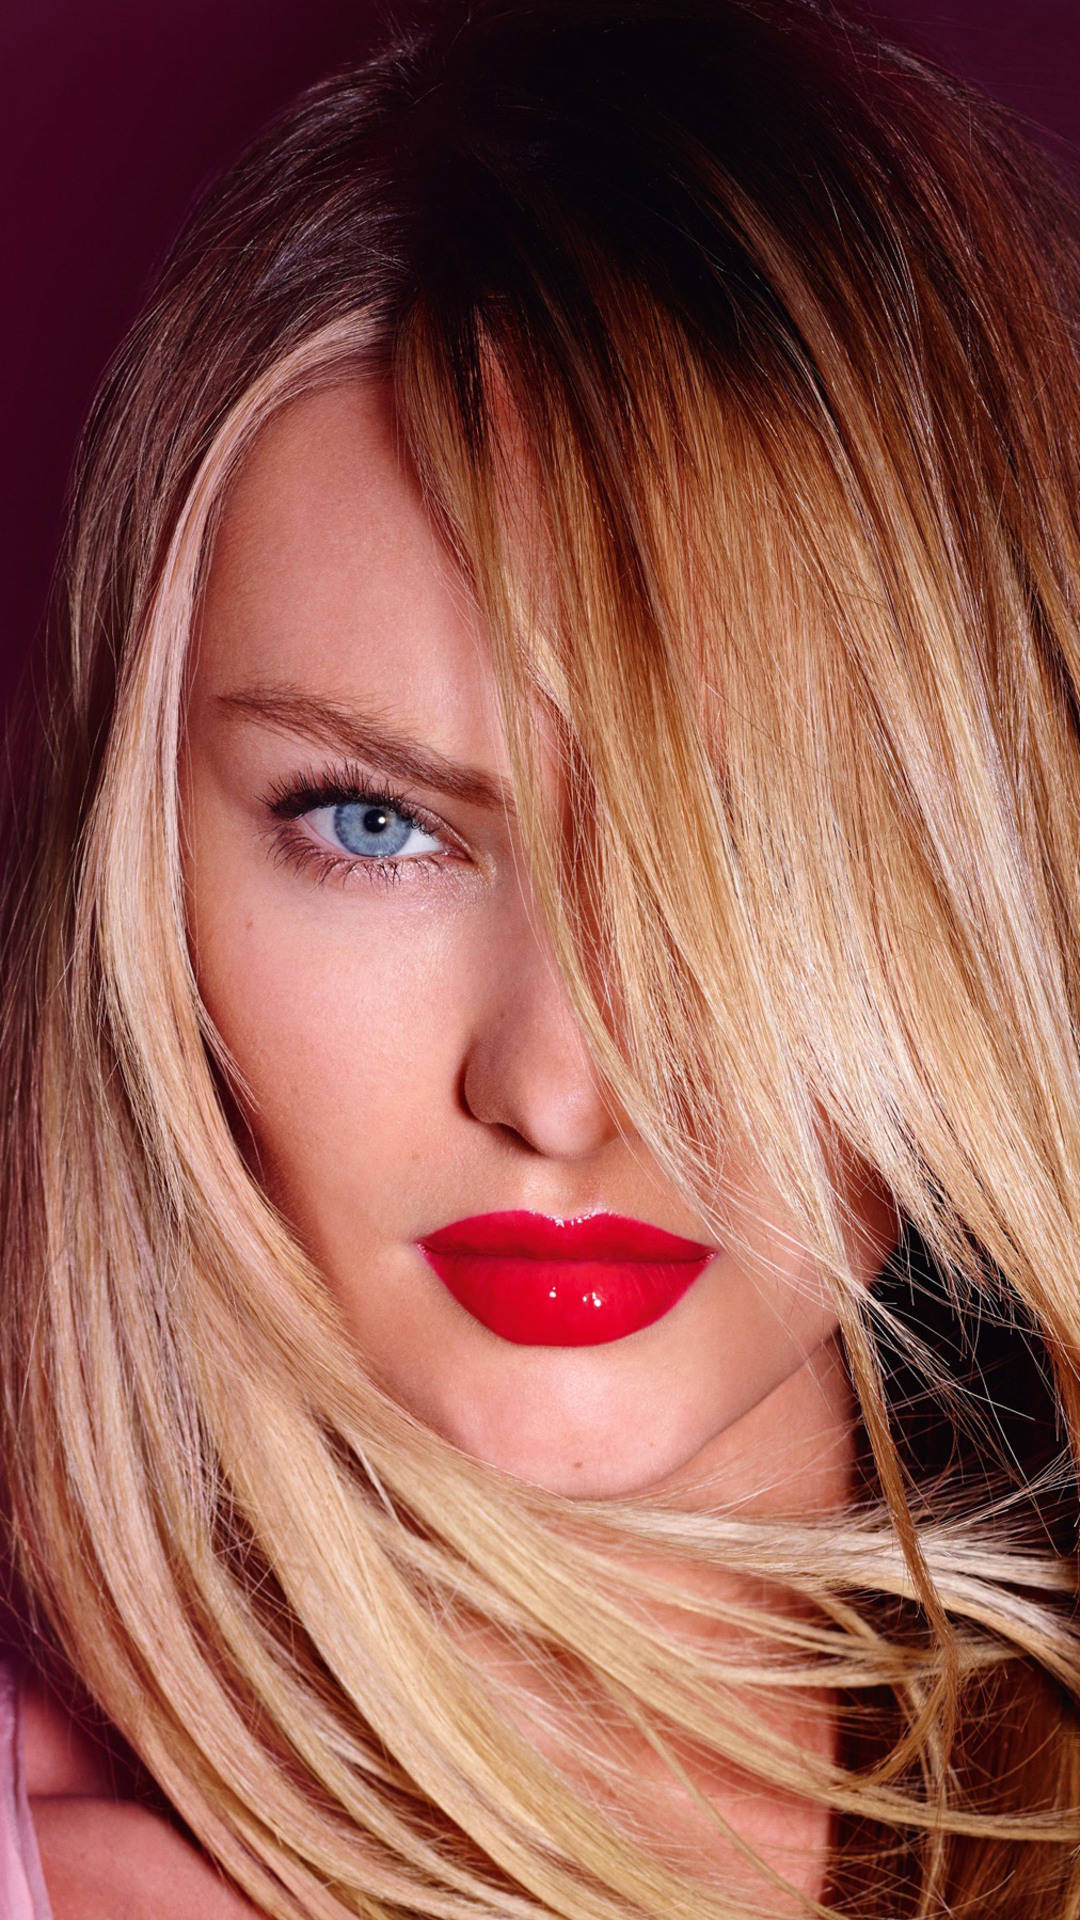 Candice Swanepoel Hair Photography Wallpaper